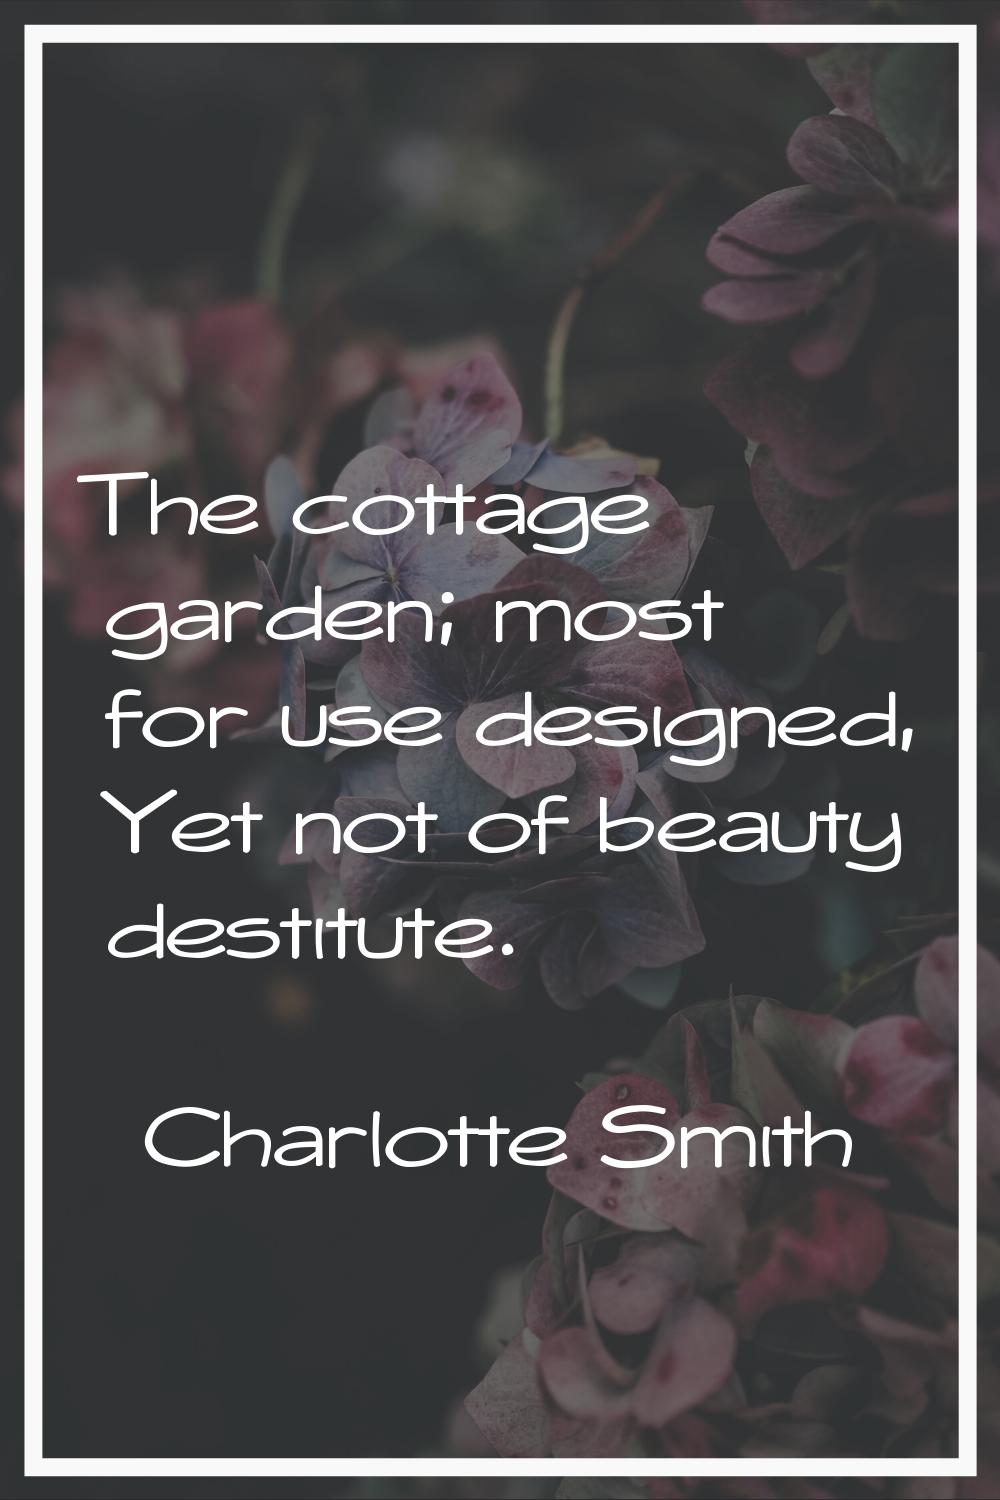 The cottage garden; most for use designed, Yet not of beauty destitute.